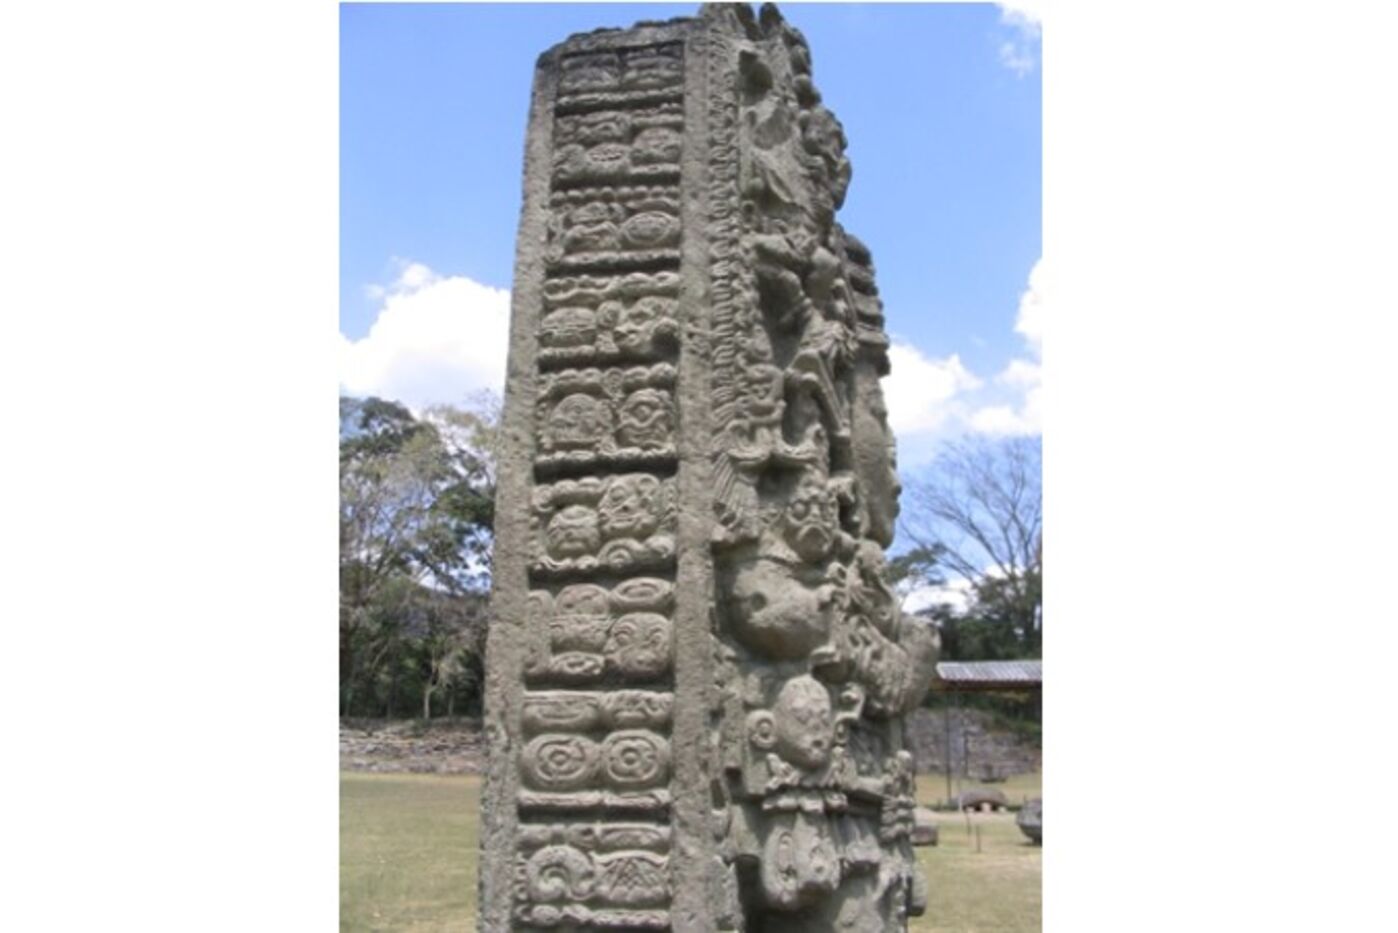 Classic period Maya writing from Stela A at Copan, Honduras, depicting the 13th ruler in the city's dynasty.